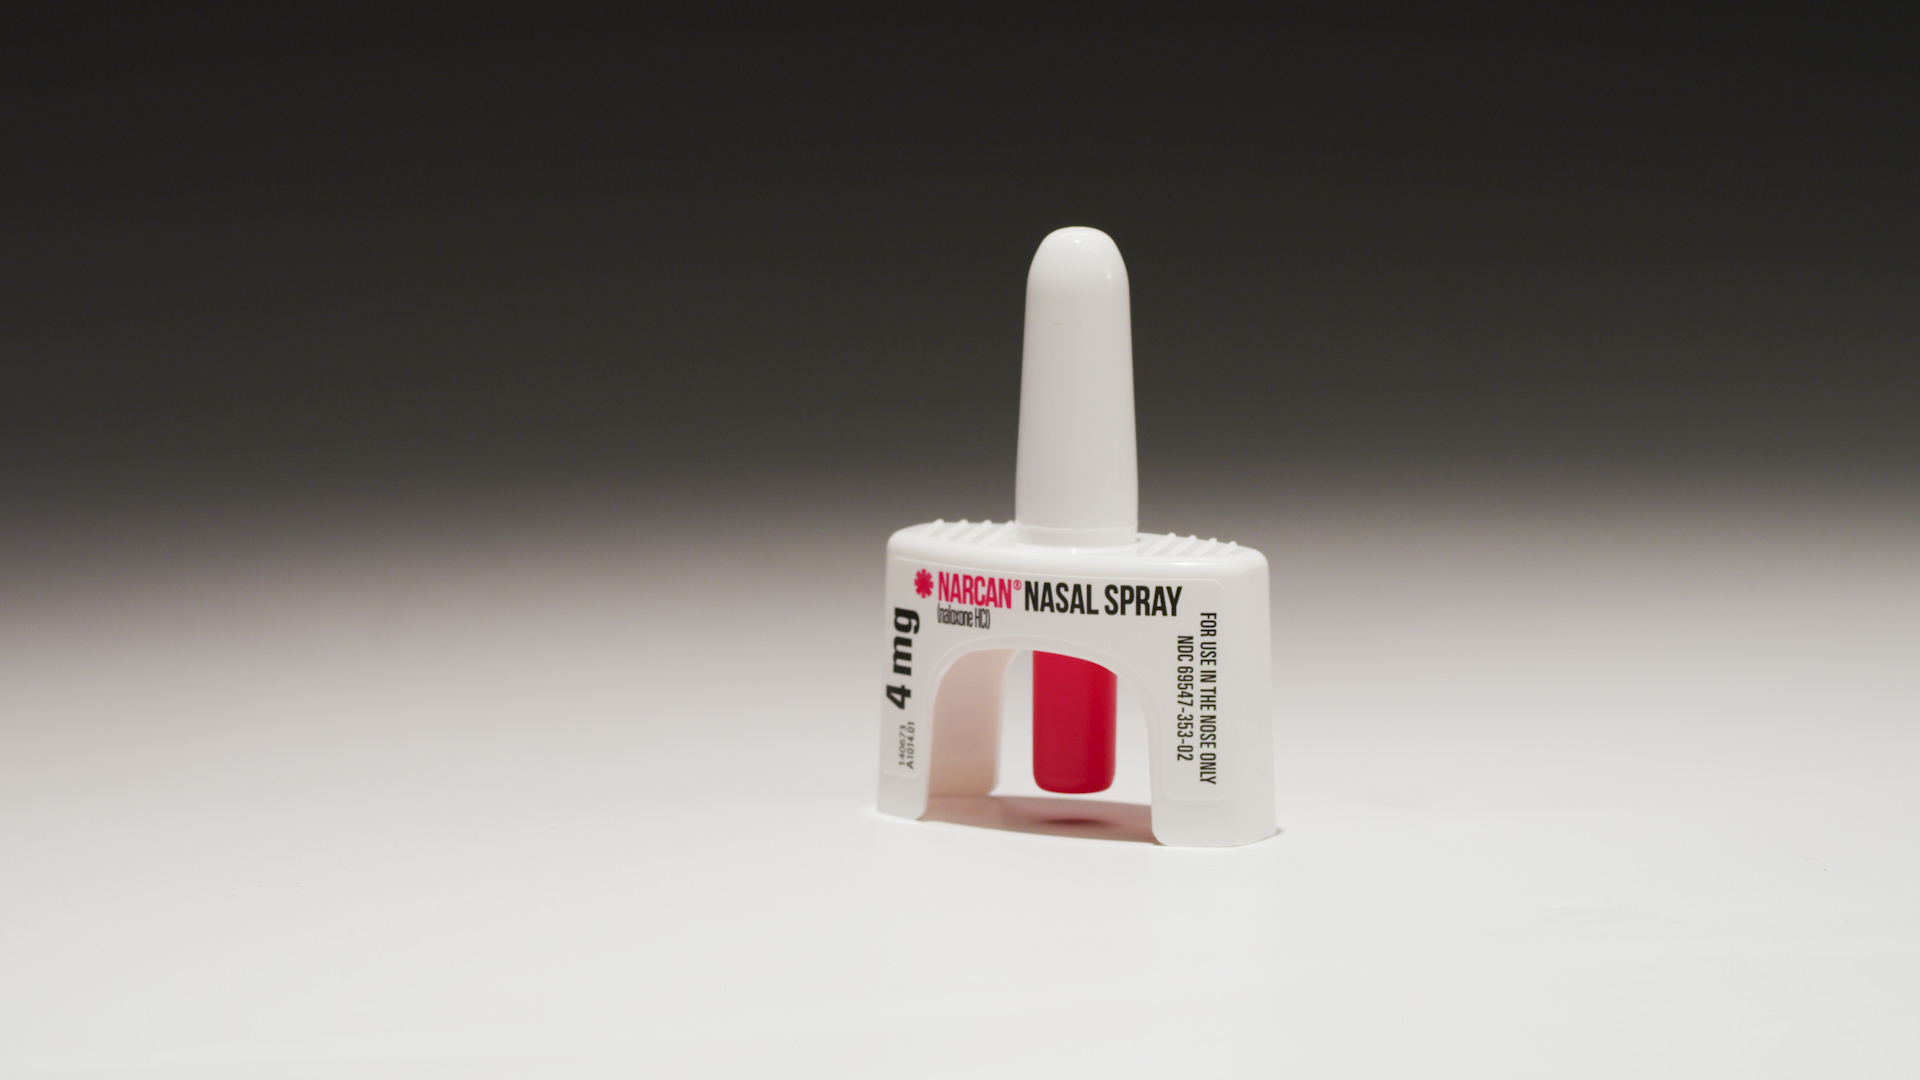 U S Fda Approves Over The Counter Designation For Emergent Biosolutions’ Narcan® Nasal Spray A